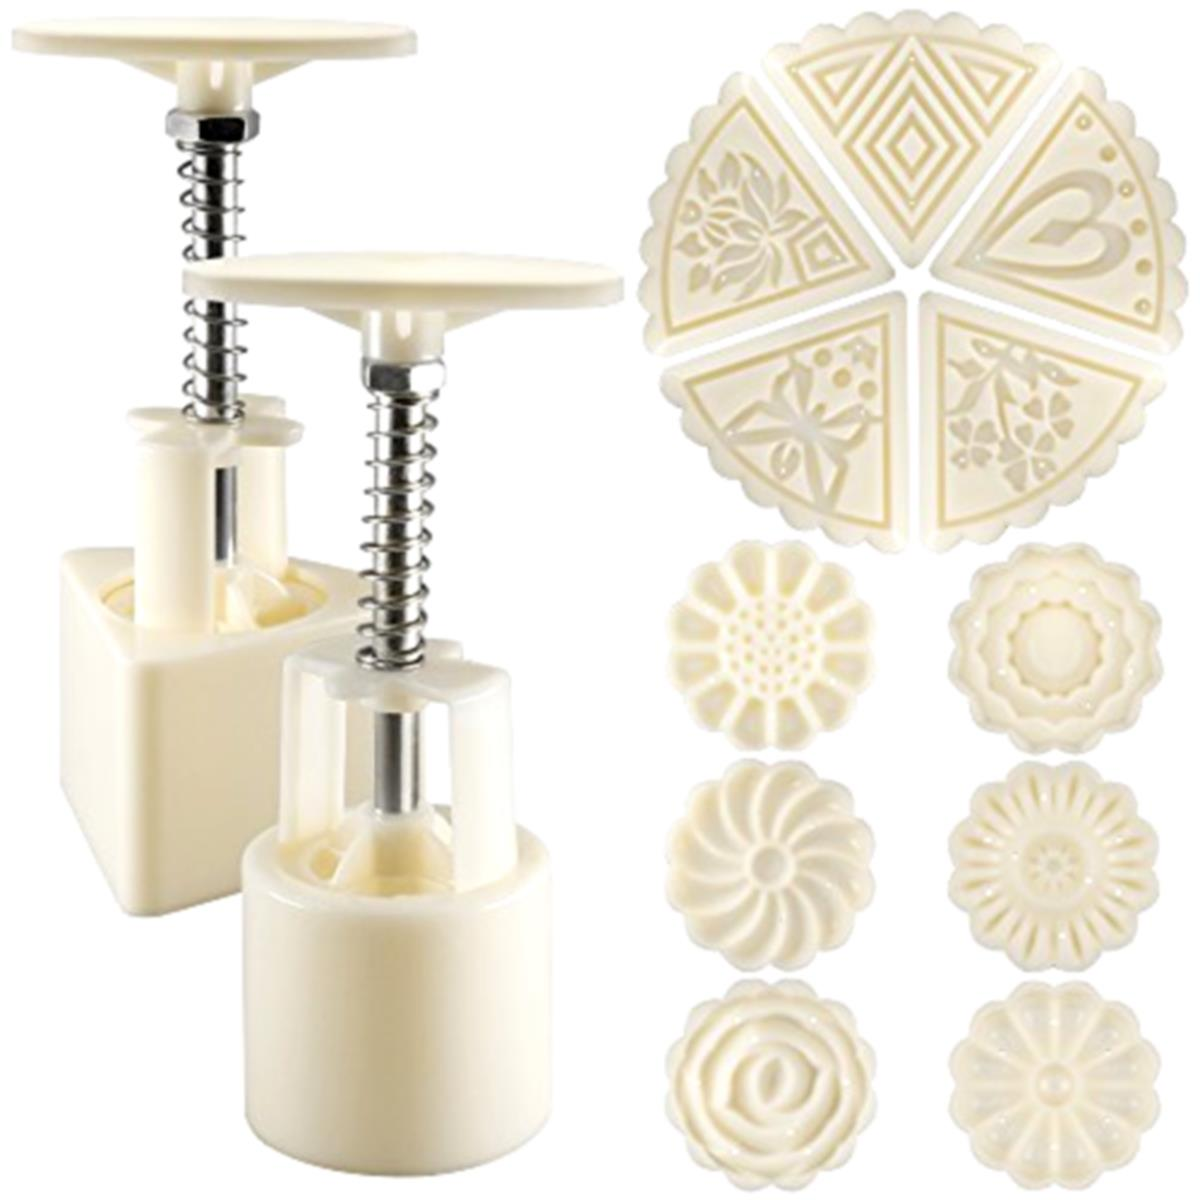 2 Sets Mooncake Pastry Press Mold DIY Hand Flower Pattern Mould 50g w/11 Stamps Round Triangle